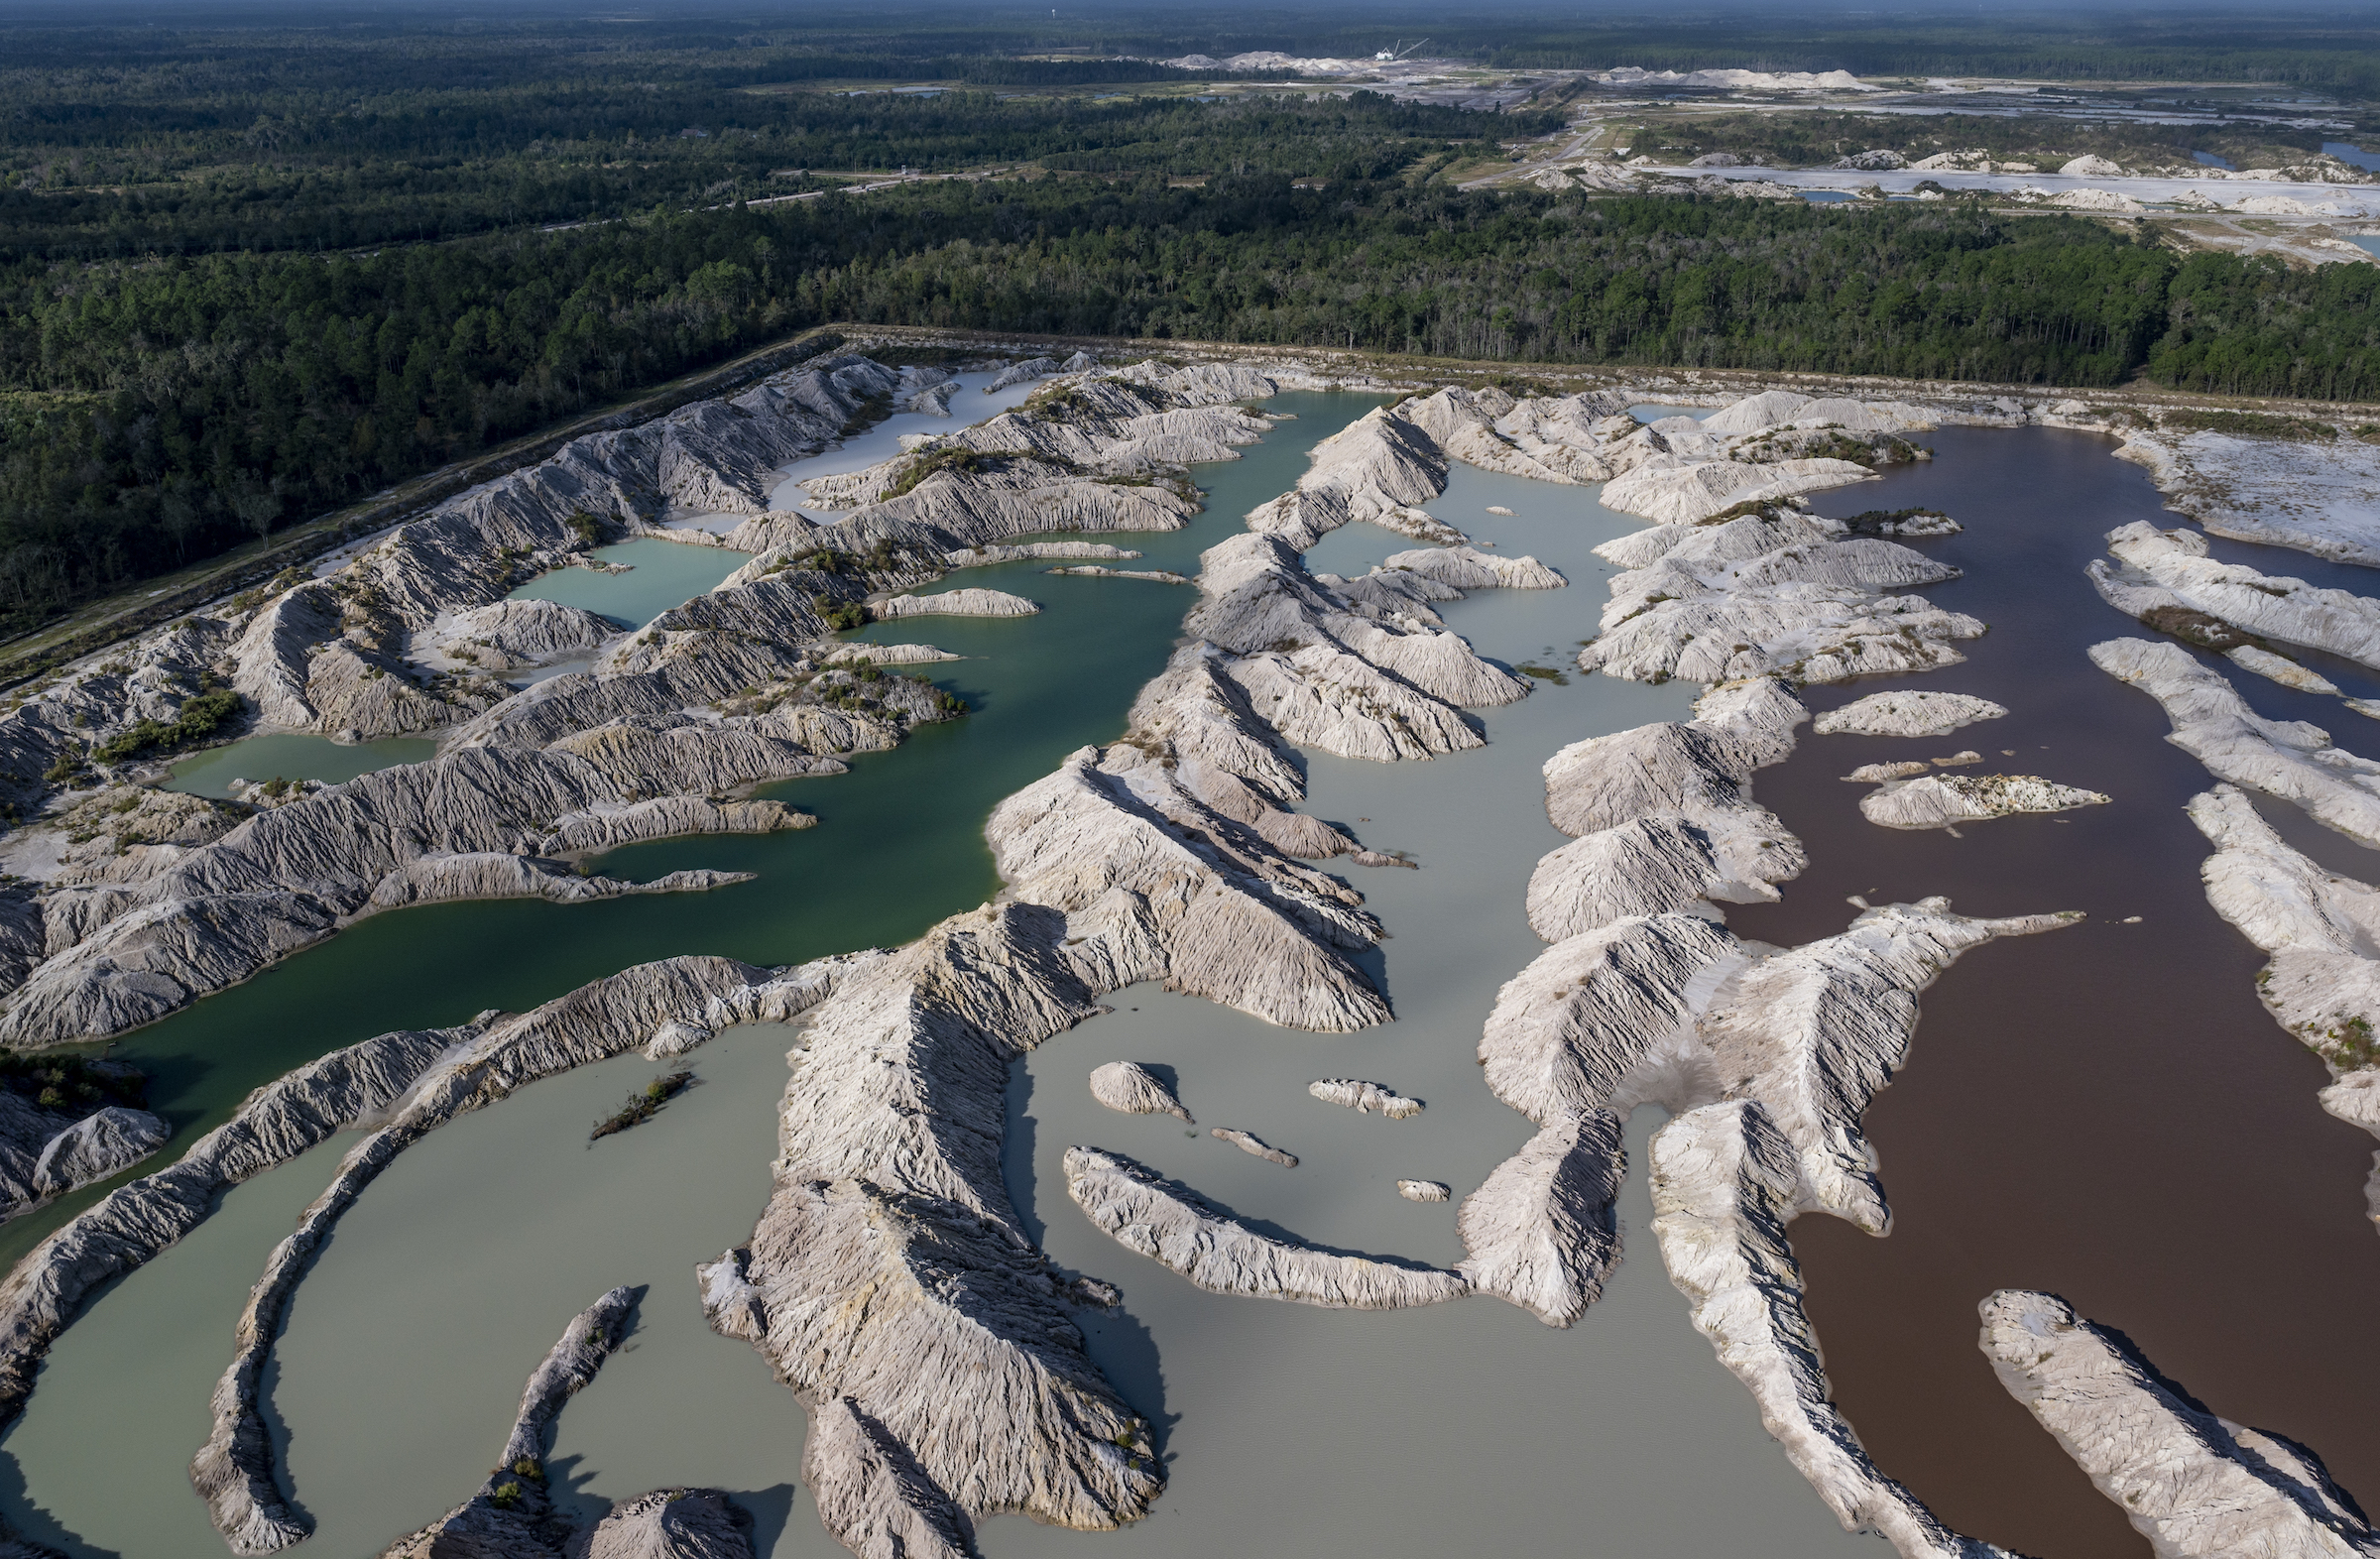 Photo by Jason Gulley. Strip mining for phosphate transforms forests into cratered moonscapes. Phosphate mines use tremendous volumes of water and supply a key ingredient for the fertilizer that is fueling algae blooms in Florida's springs and waterways. According to The Florida Industrial and Phosphate Research Institute, Florida produces about 80% of the phosphate used in the United States. Intensive phosphate mining activities just a few miles away from White Springs were initially blamed for causing White Sulfur Springs to dry up. Later research suggested soaring groundwater withdraws needed to slake the thirst of the expanding city of Jacksonville, nearly 50 miles to the east, may have shifted a groundwater divide. Photo over Nutrien's Swift Creek Phosphate Mine Complex, near White Springs.